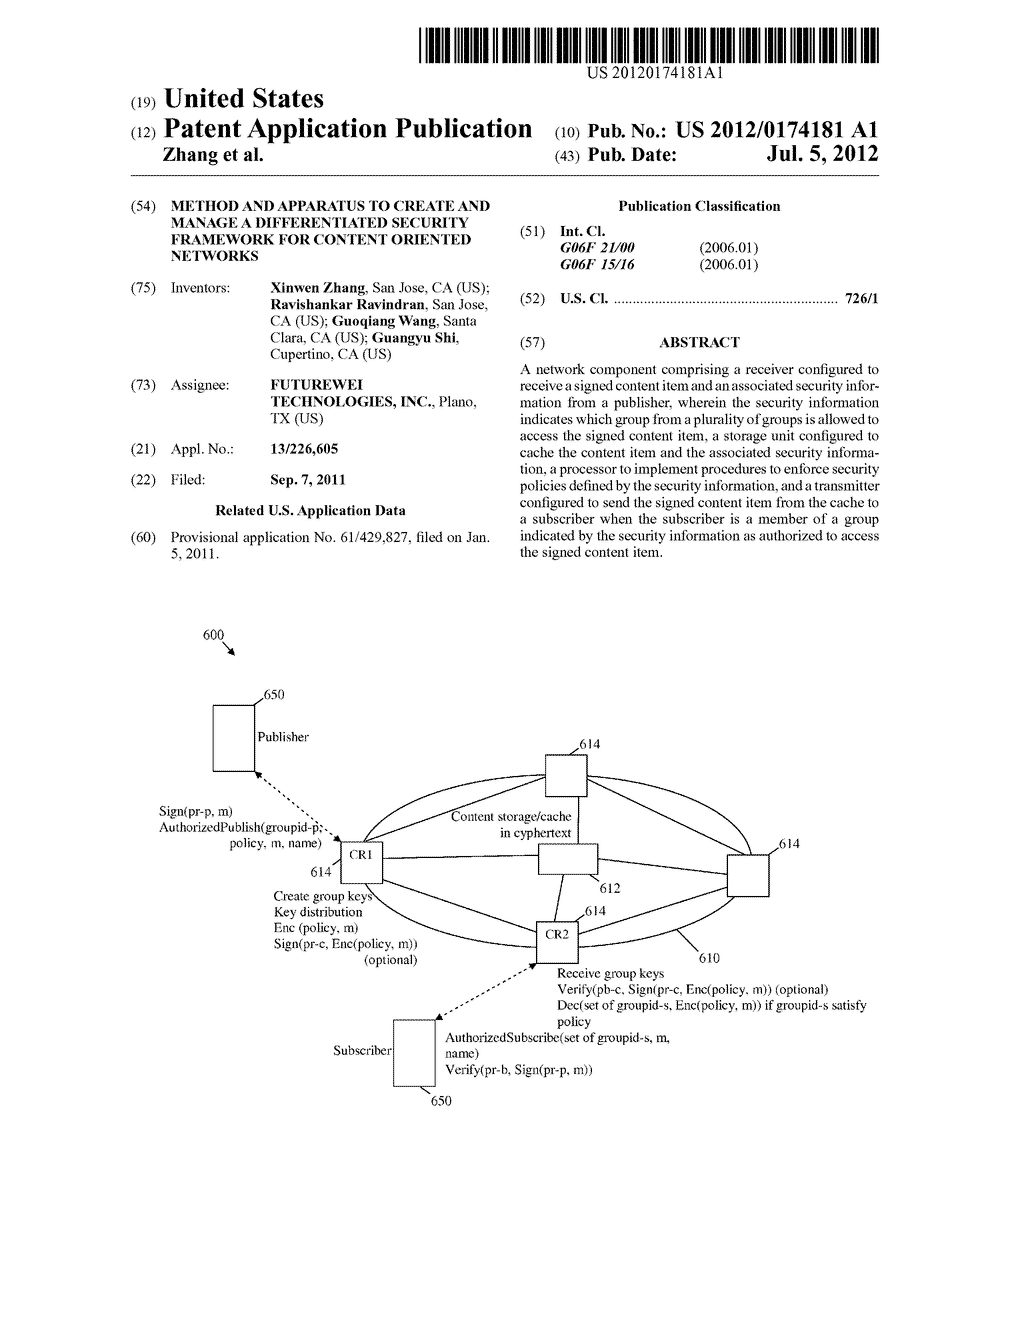 Method and Apparatus to Create and Manage a Differentiated Security     Framework for Content Oriented Networks - diagram, schematic, and image 01